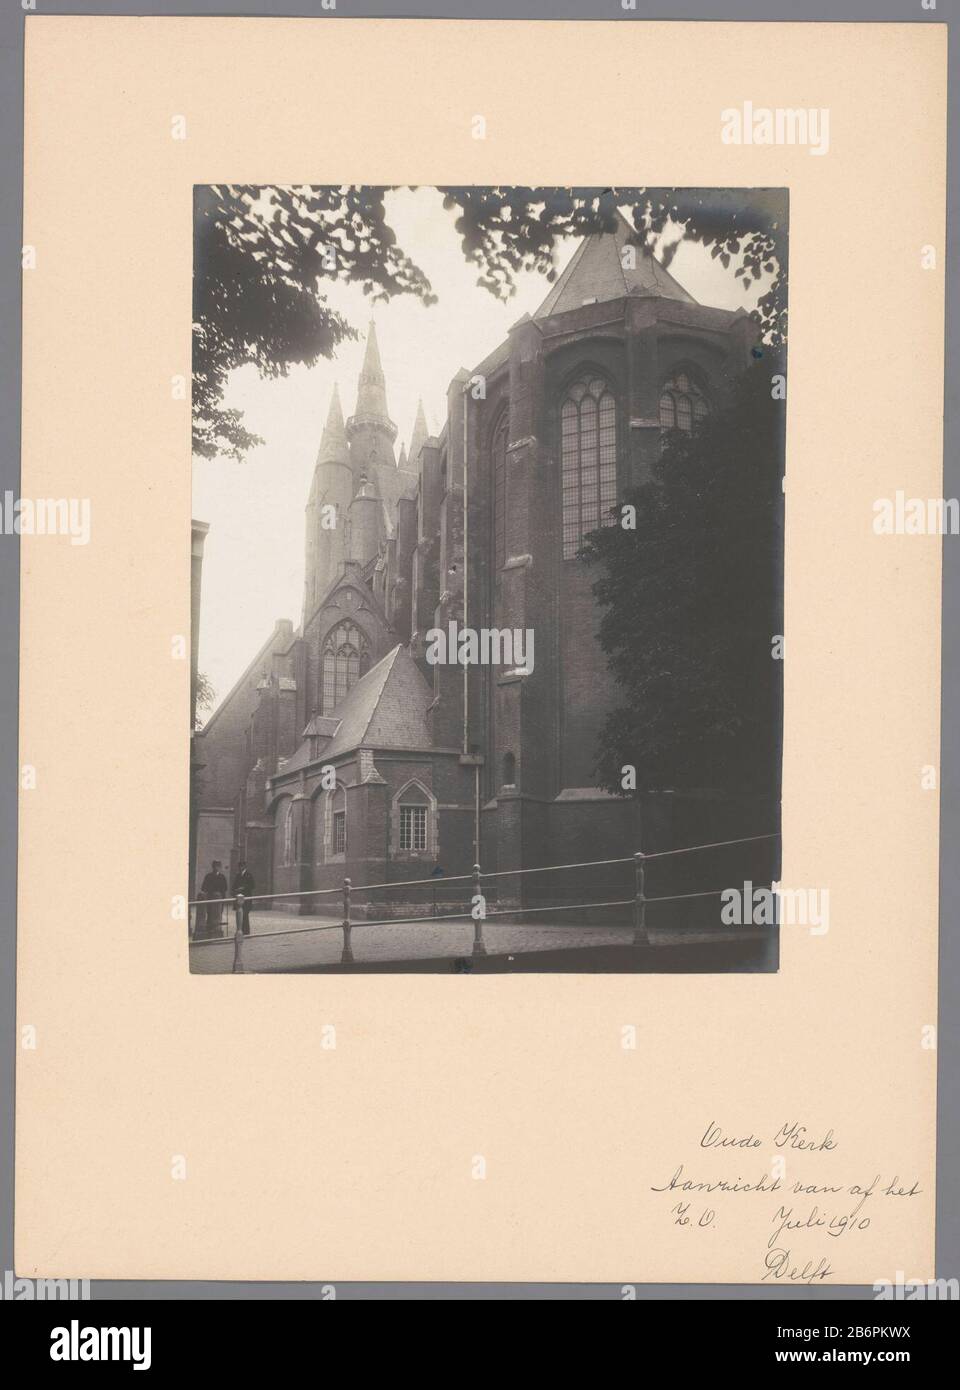 Gezicht op de Oude Kerk te Delft View of the Old Church in Delft Property Type: photographs Item number: RP-F 00-2300 Inscriptions / Brands: annotation, recto, handwritten: 'Old Church / Face of off SE / July 1910 / Deflt'annotatie , verso, handwritten: 'JM Schouten / Ca. 1984' Manufacturer : Photographer: anonymous (Heritage) (attributed to) Photographer: A.J.M. Mulder (possible) Place manufacture: Delft Dating: 1910 Material: paper carton Technique: gelatin silver print dimensions: photo: H 201 mm × W 152 mm Subject: church (exterior) Where: Old Church Stock Photo